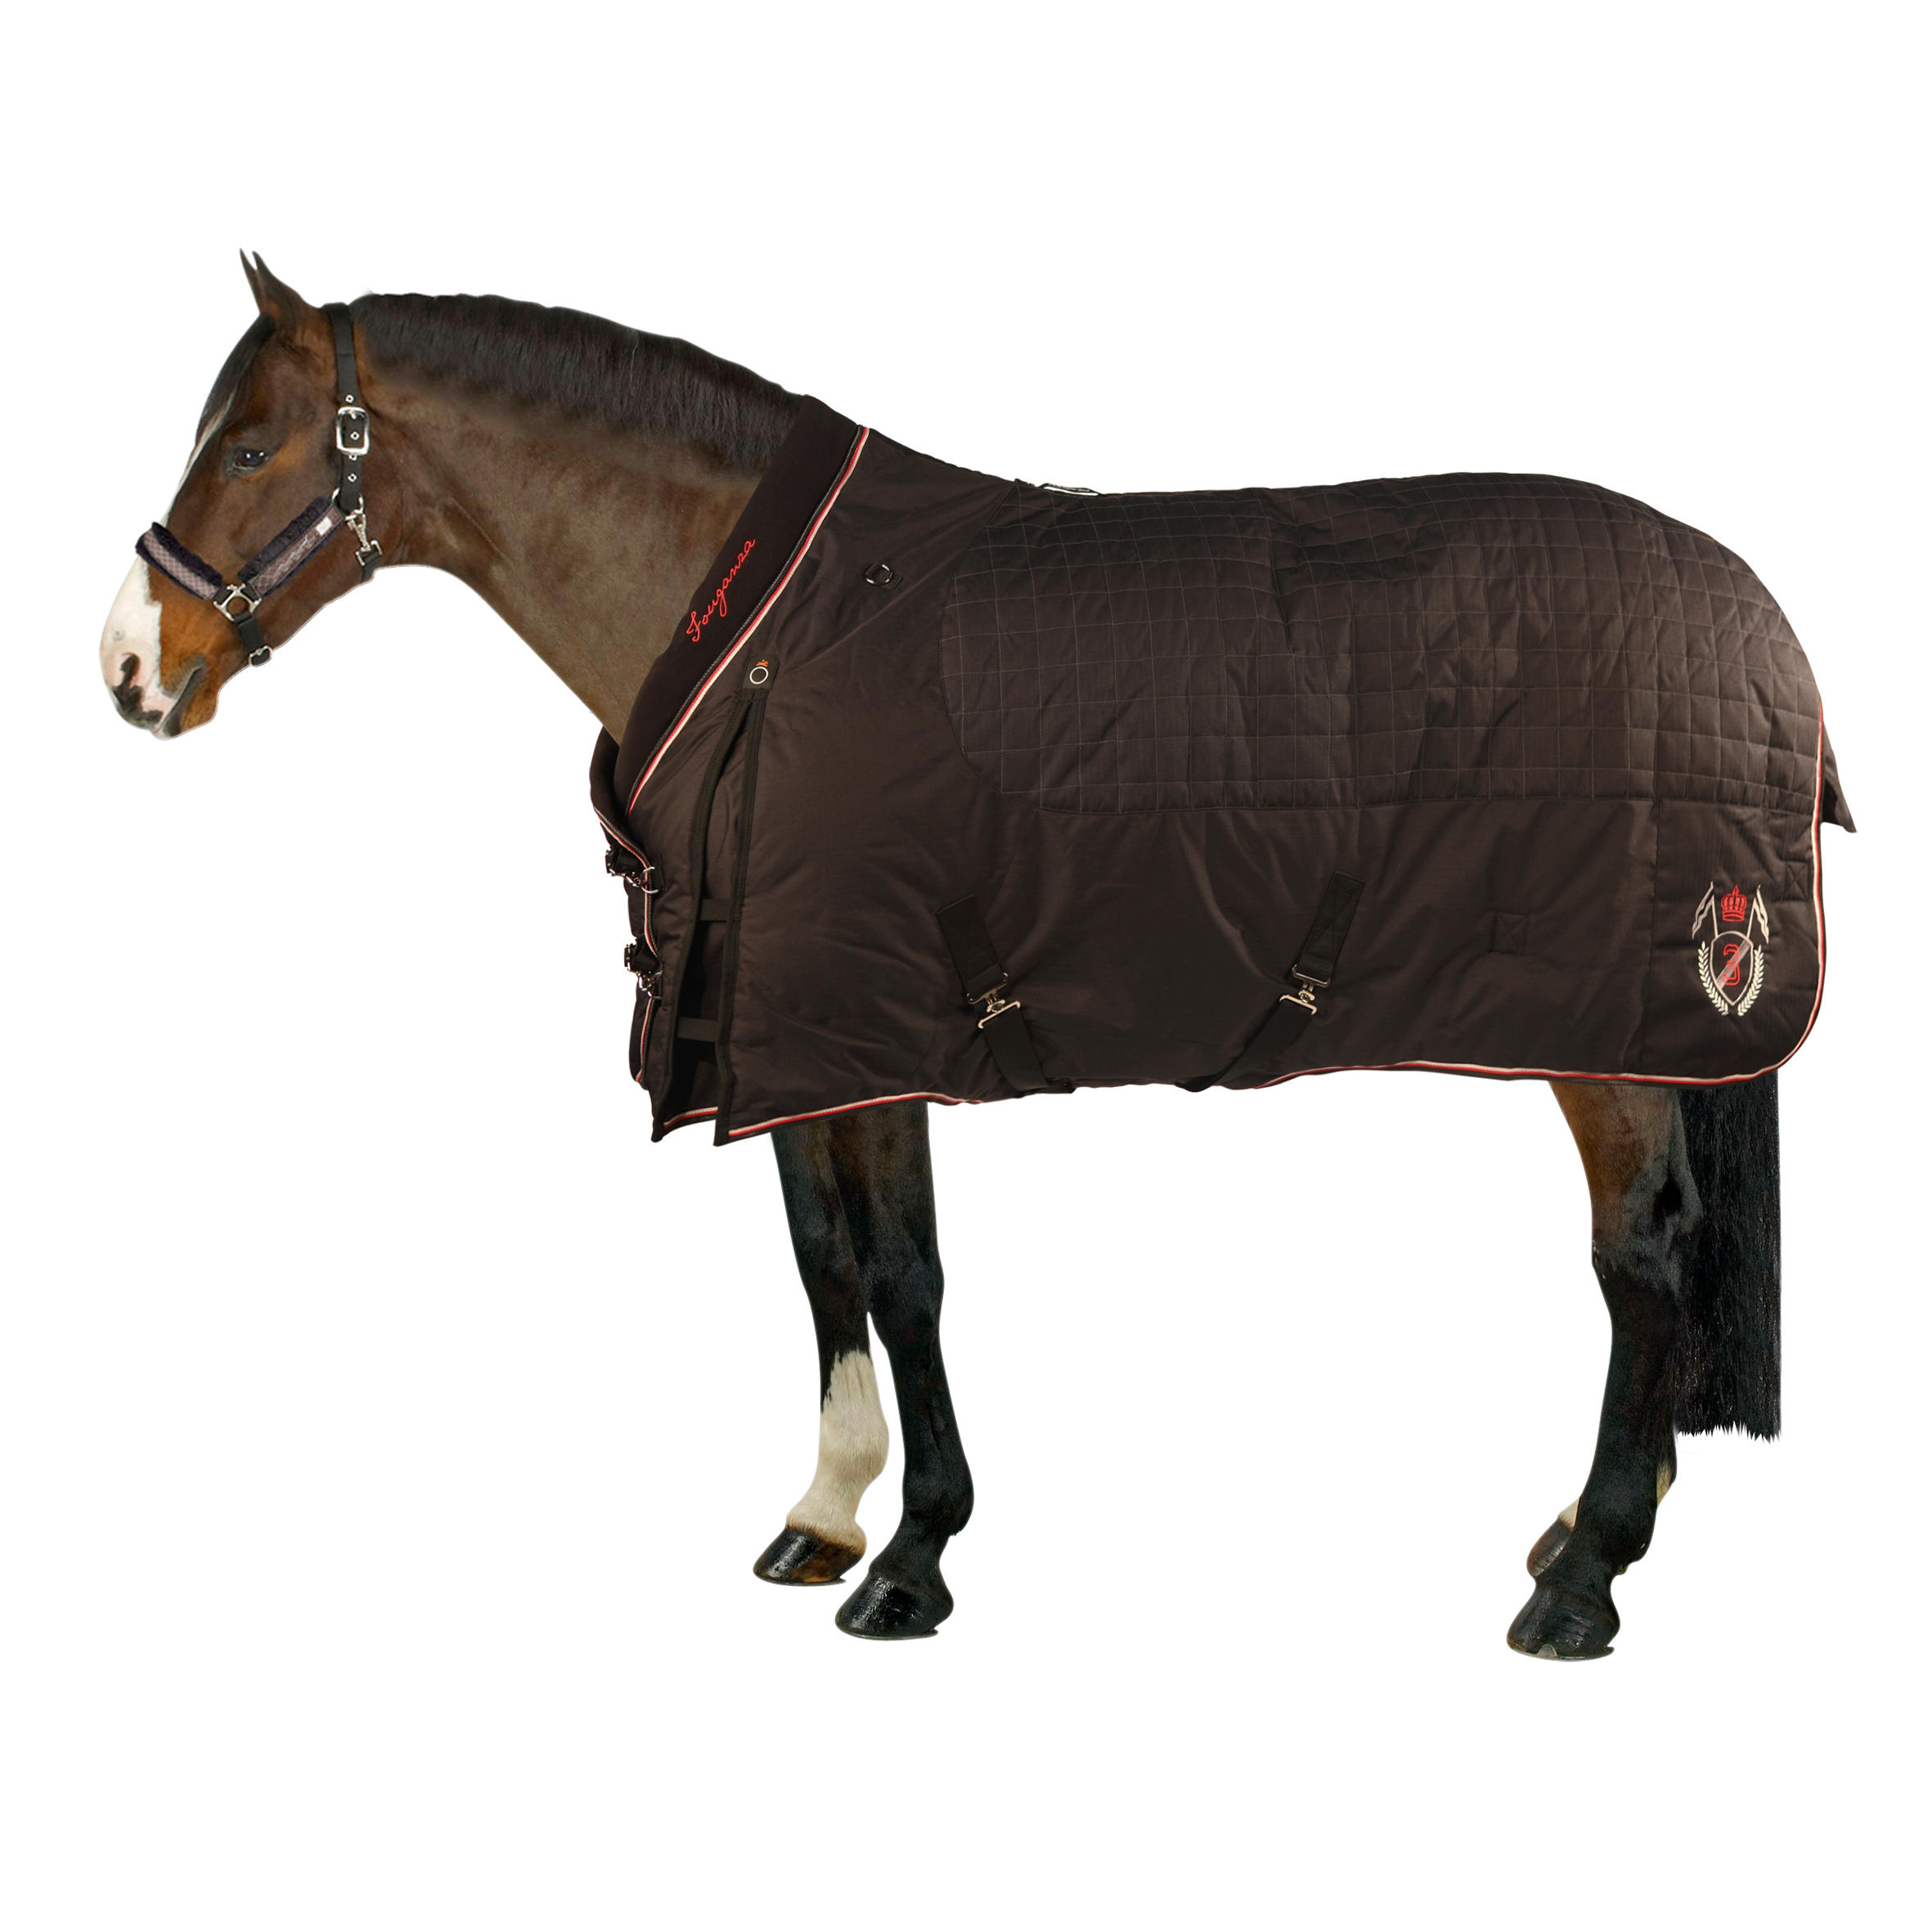 FOUGANZA STABLE 400 "3" horse riding stable rug - anthracite/red - pony and horse